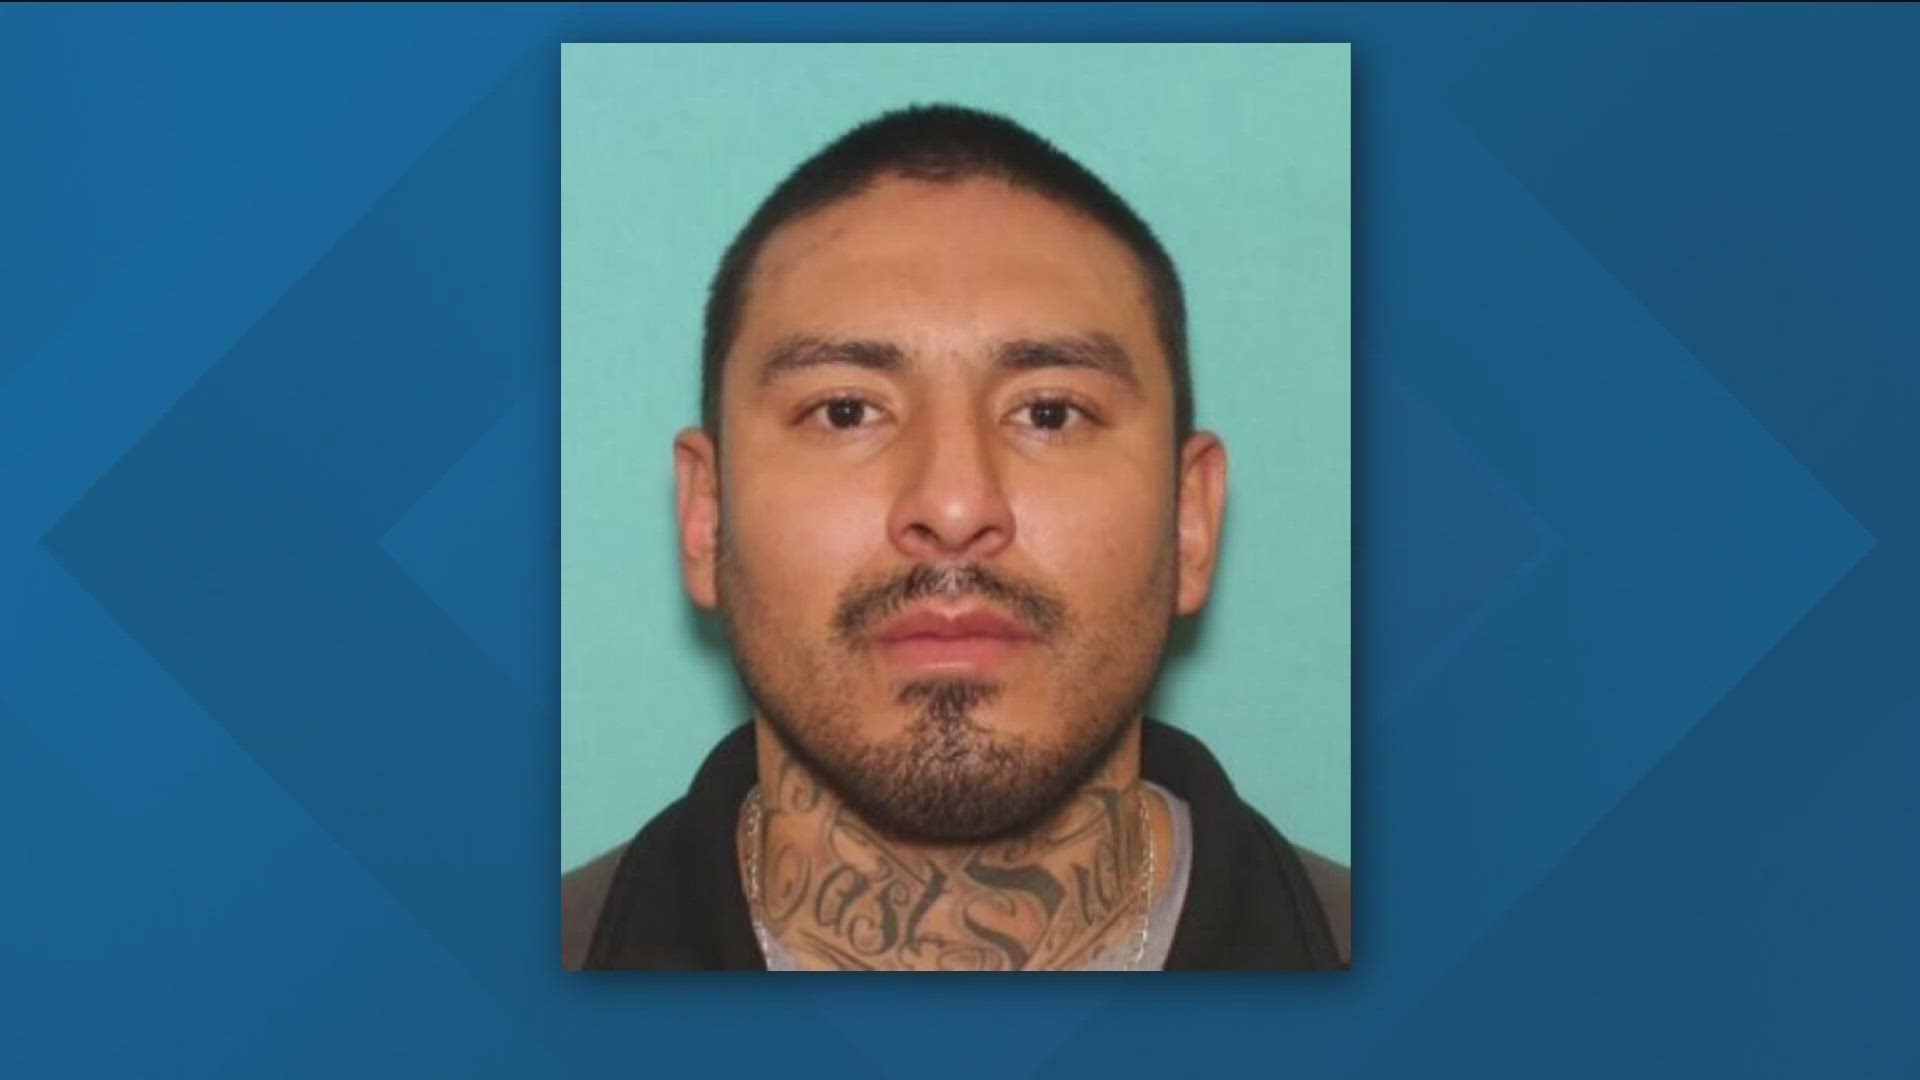 Police arrested 34-year-old Gabriel Francisco Meza in a parking in Meridian. He was the suspect in a shooting that left another man in critical condition.